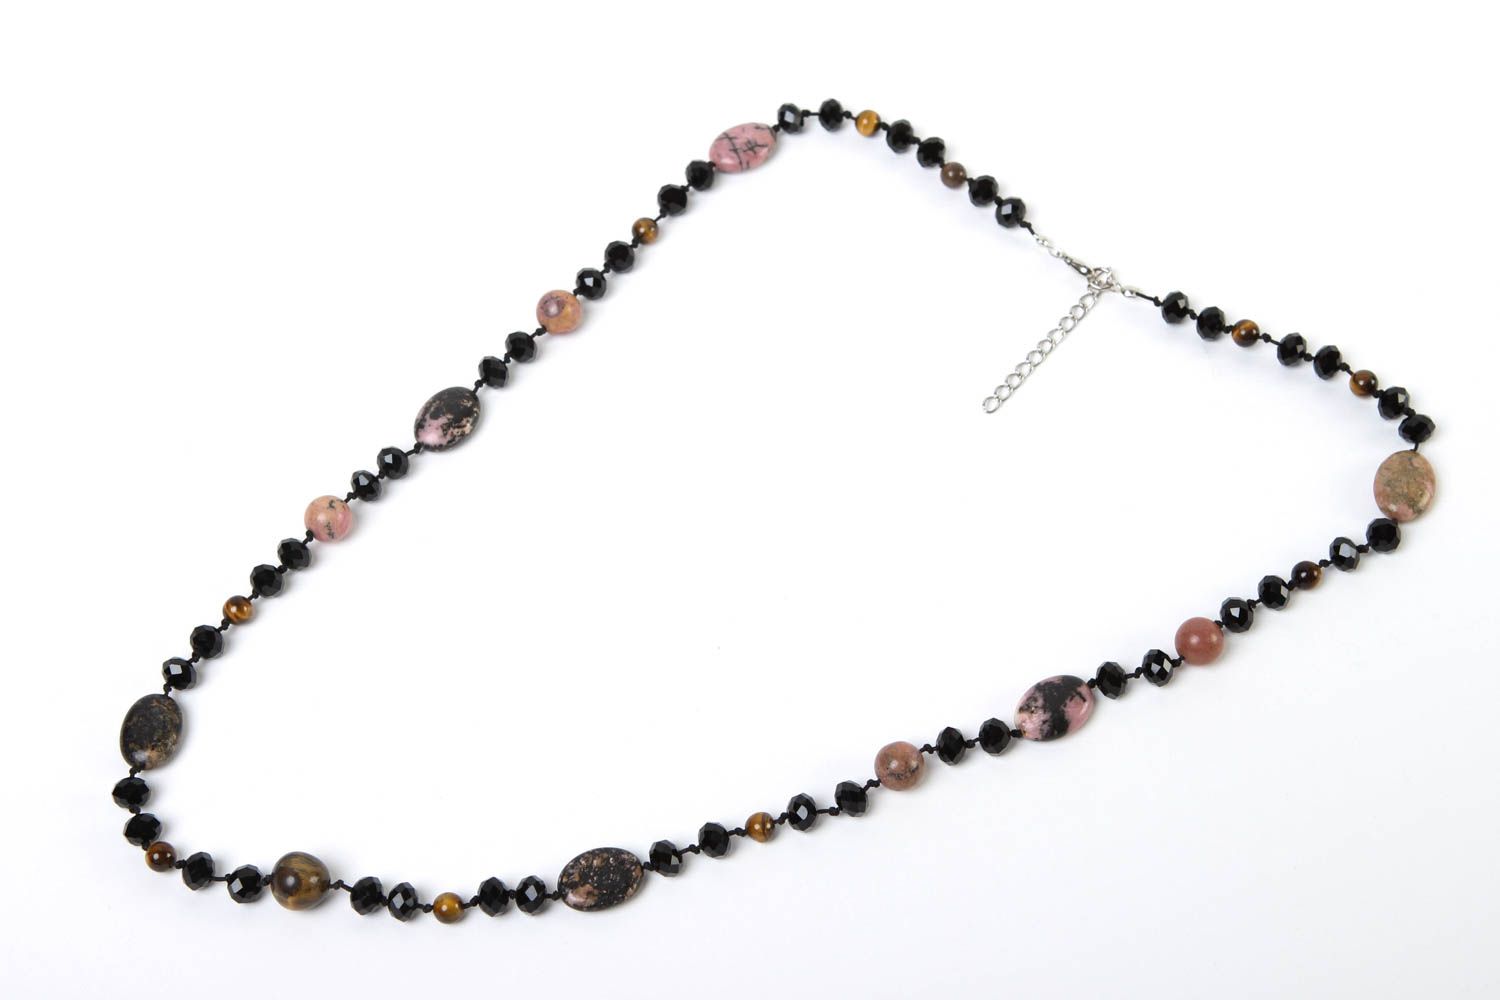 Bead necklace handmade long necklace gemstone jewelry fashion accessories photo 2